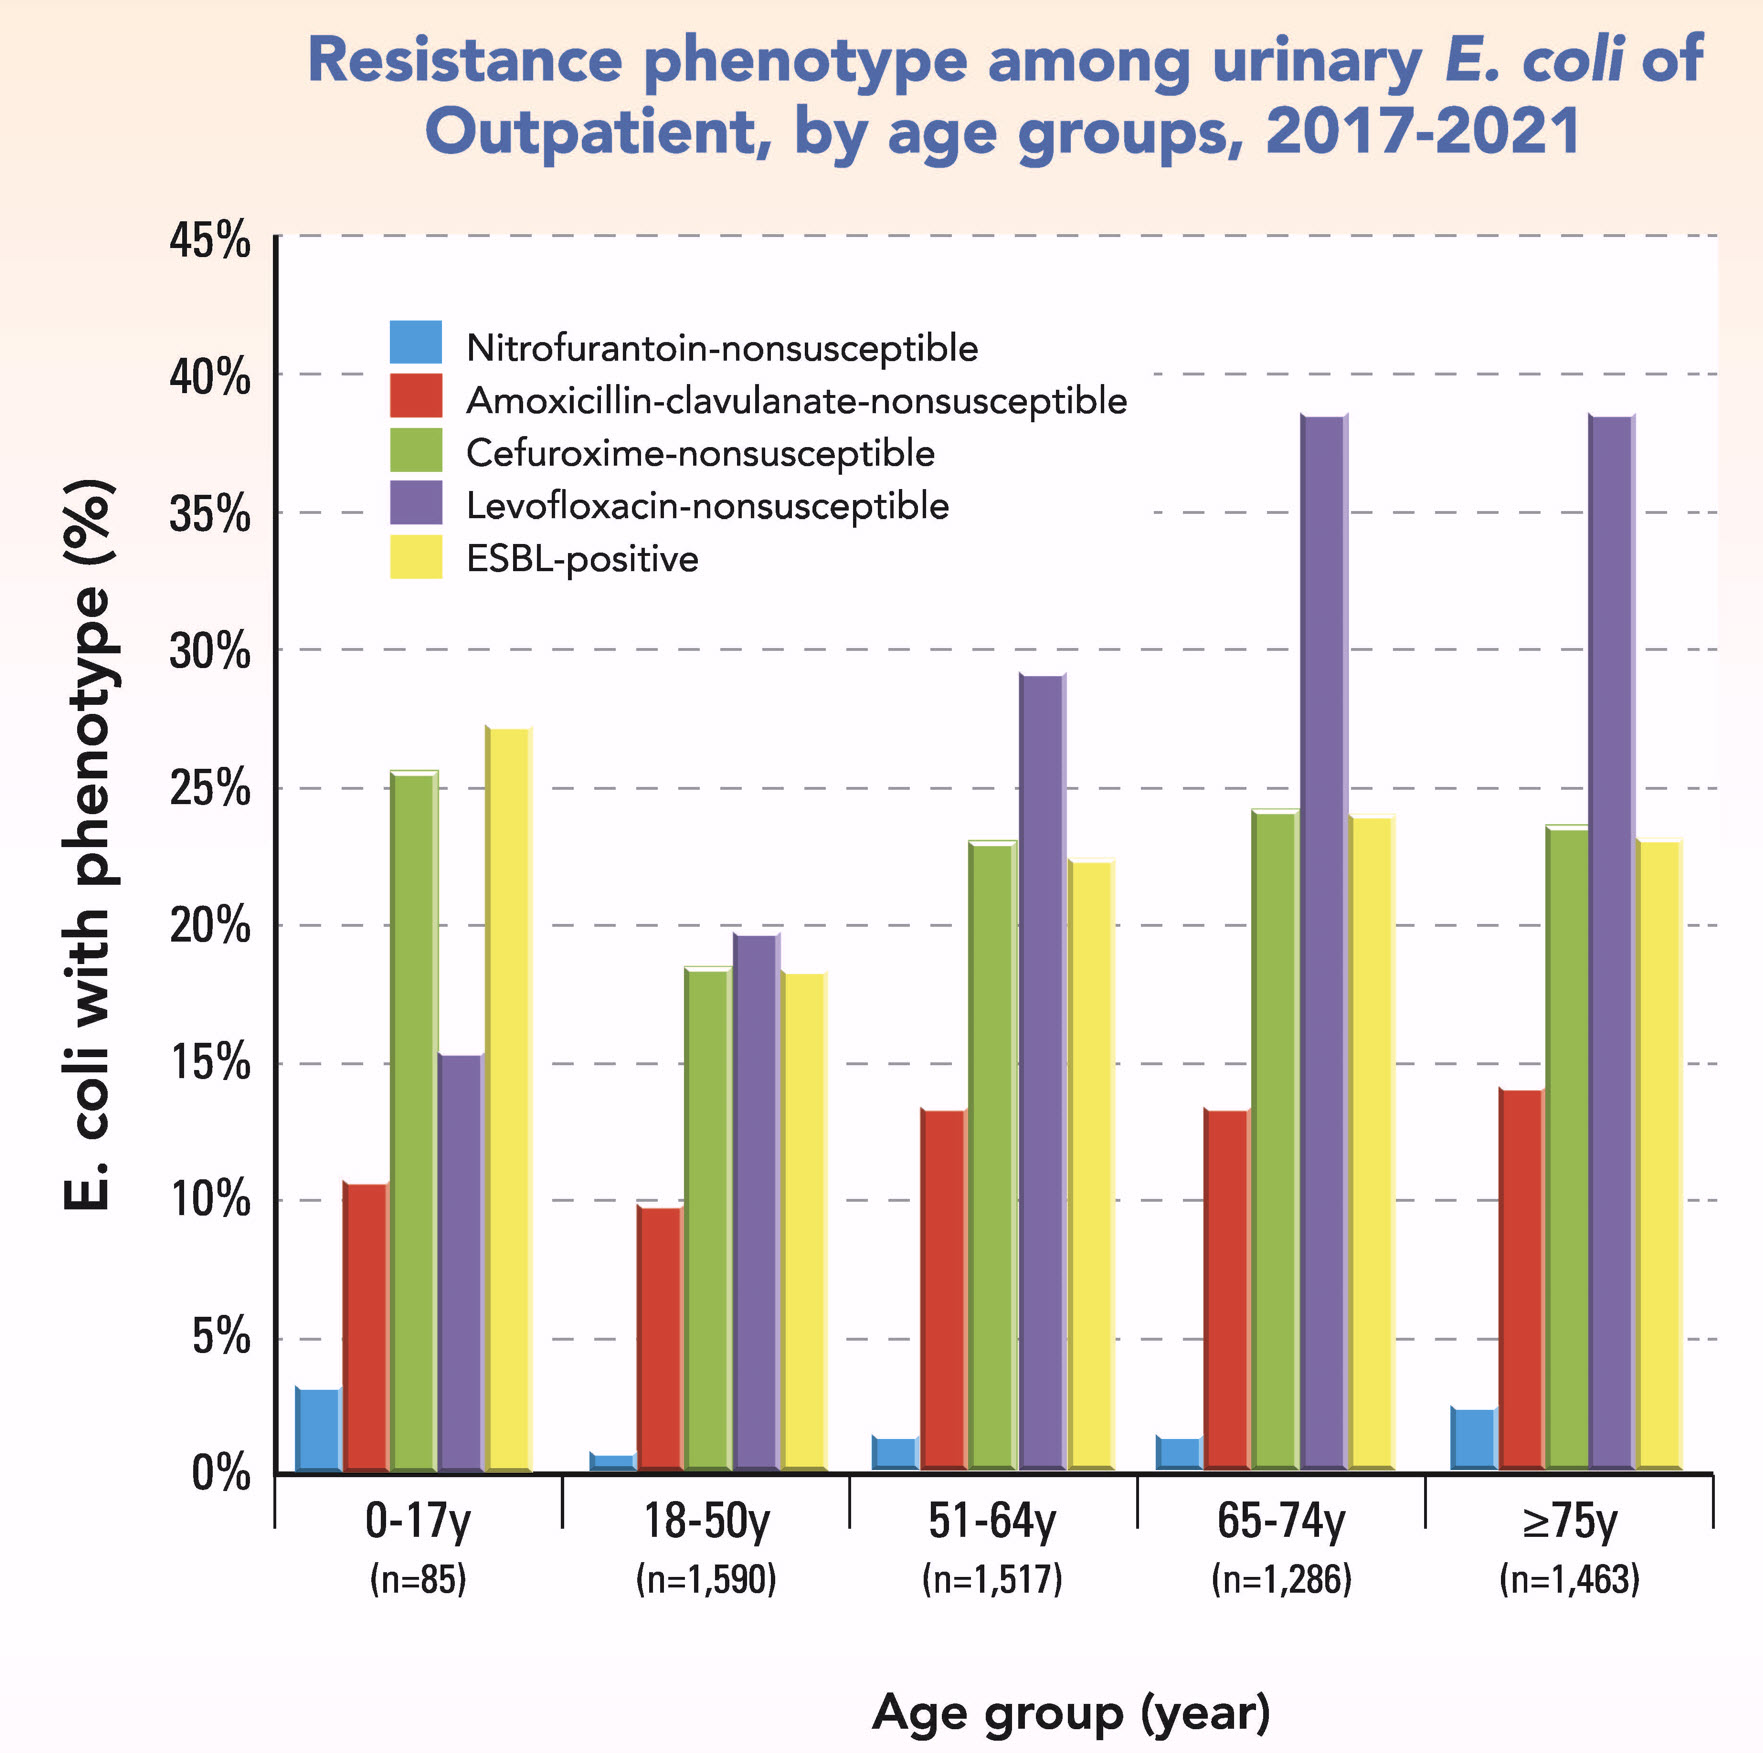 Figure HKW-1. Resistance phenotypes among urinary E. coli from outpatients by age groups, 2014-2018